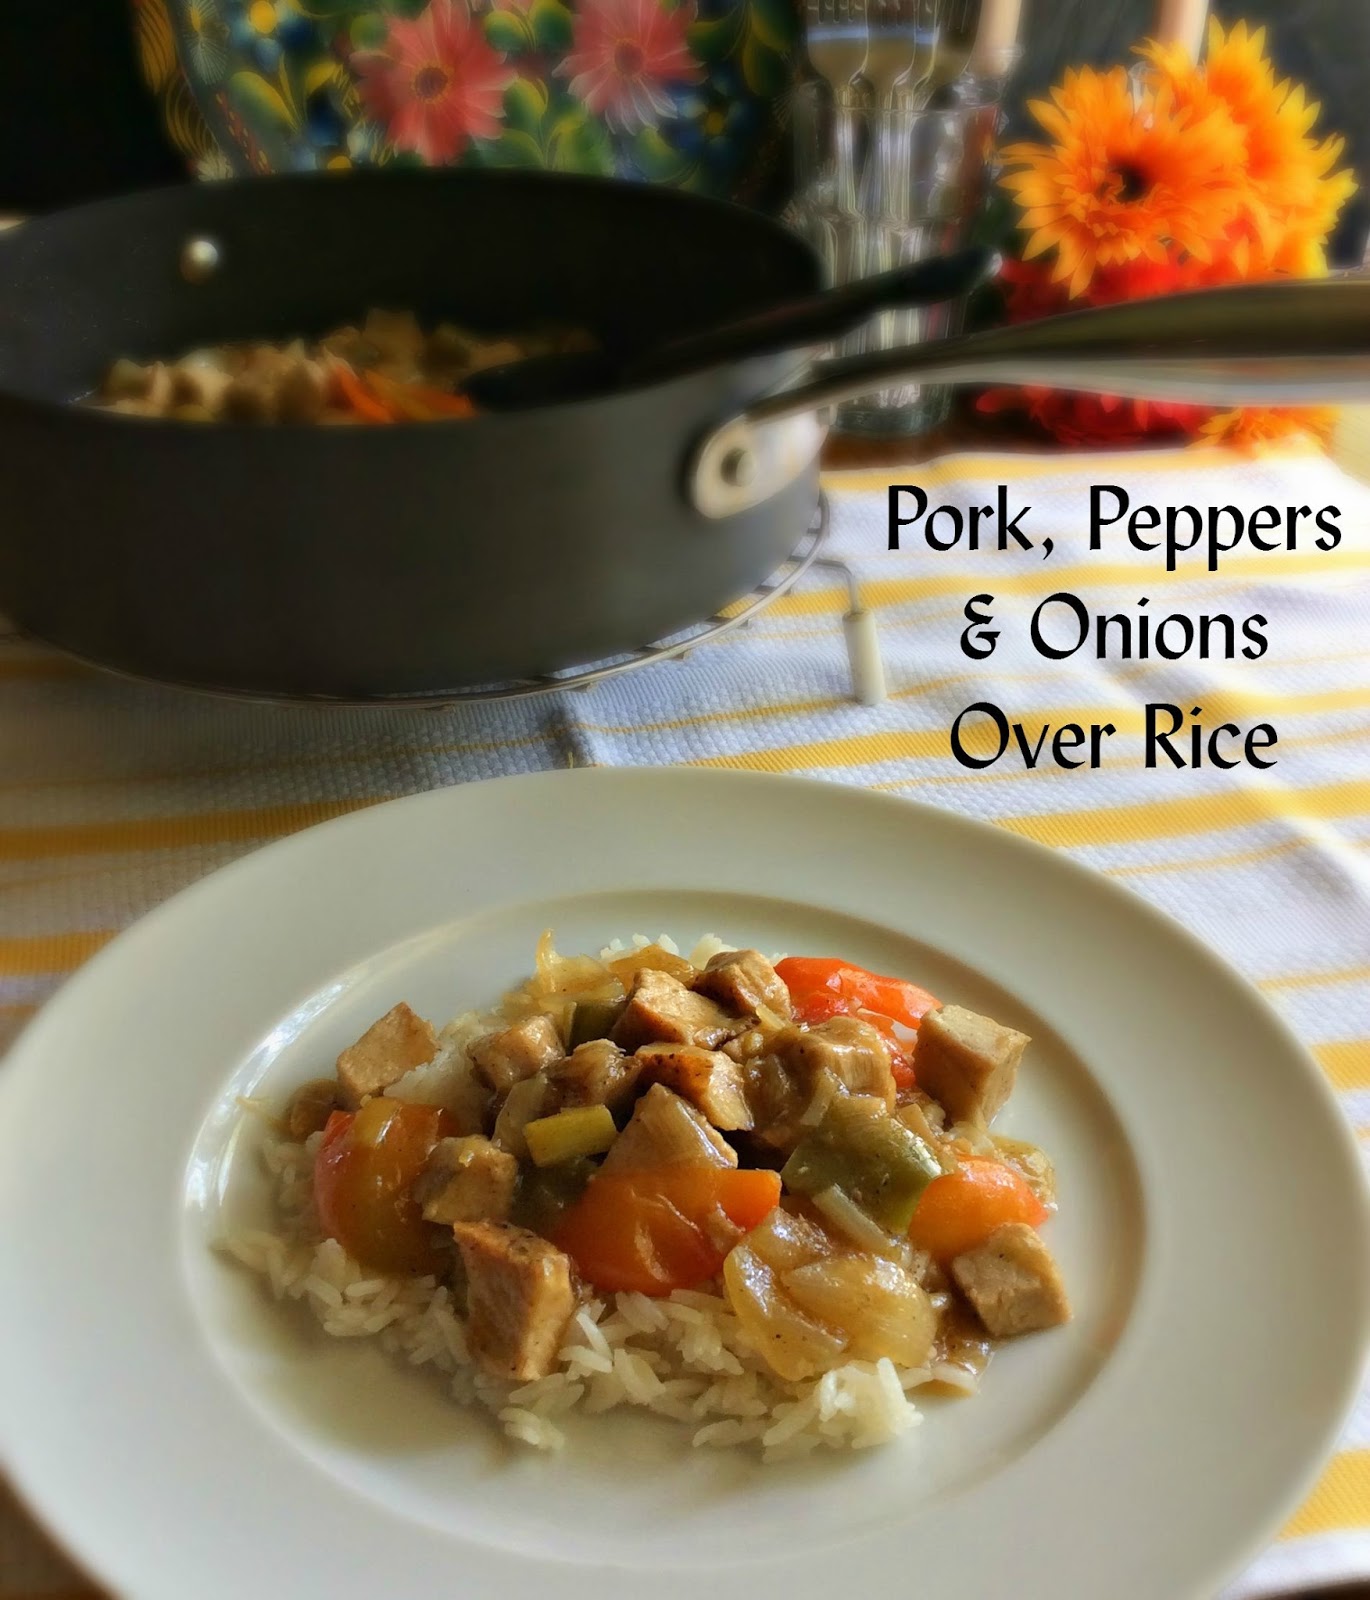 RECIPE & GIVEAWAY: Green Chili Chicken & Rice - Frankly, My Dear . . .